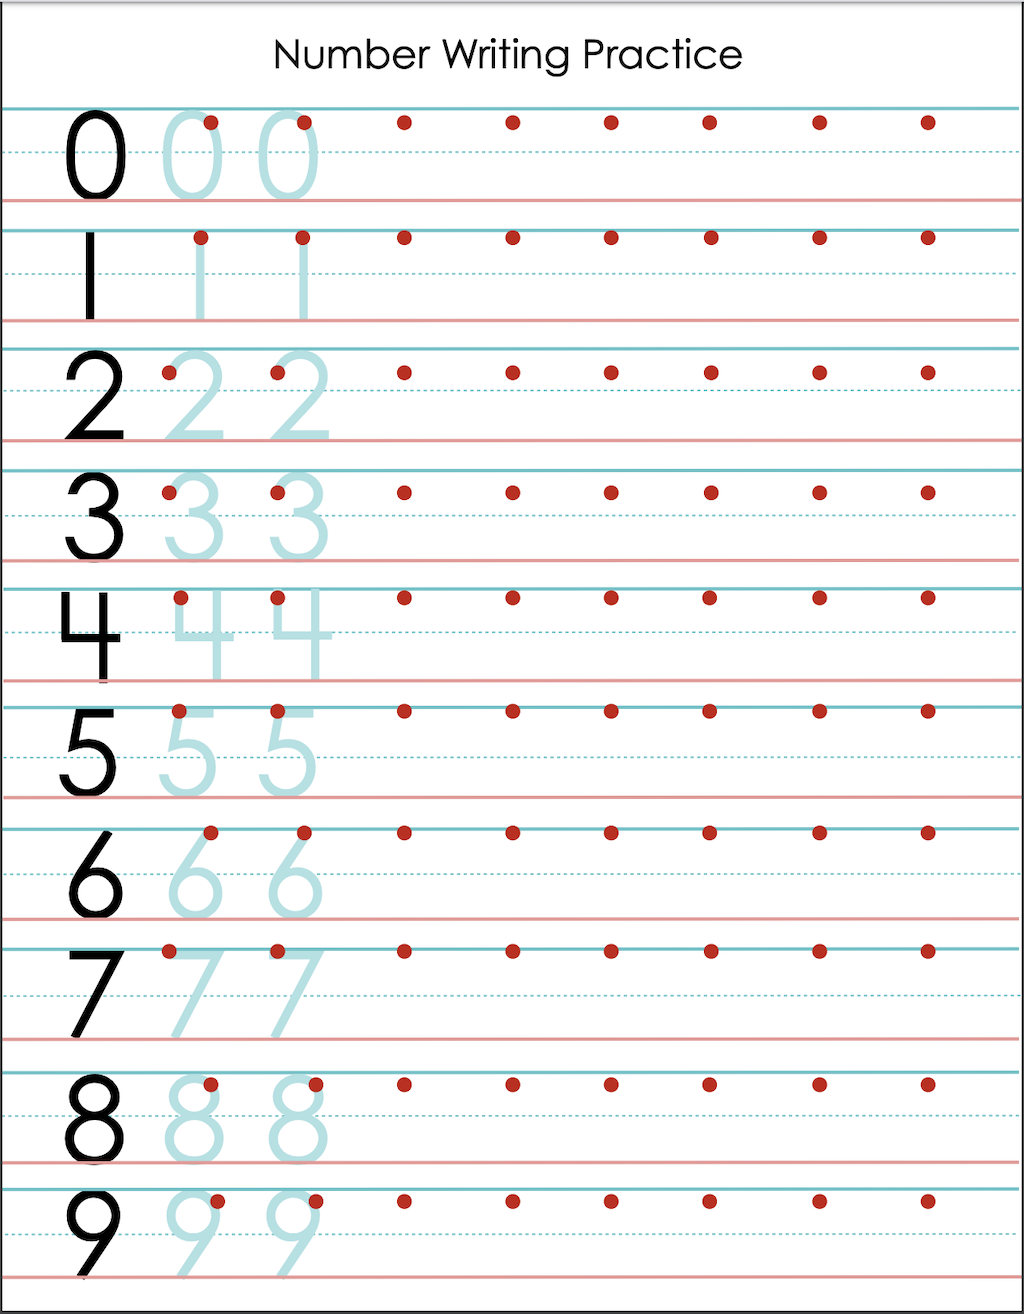 Number Writing Practice Sheet | free printable from flandersfamily.info